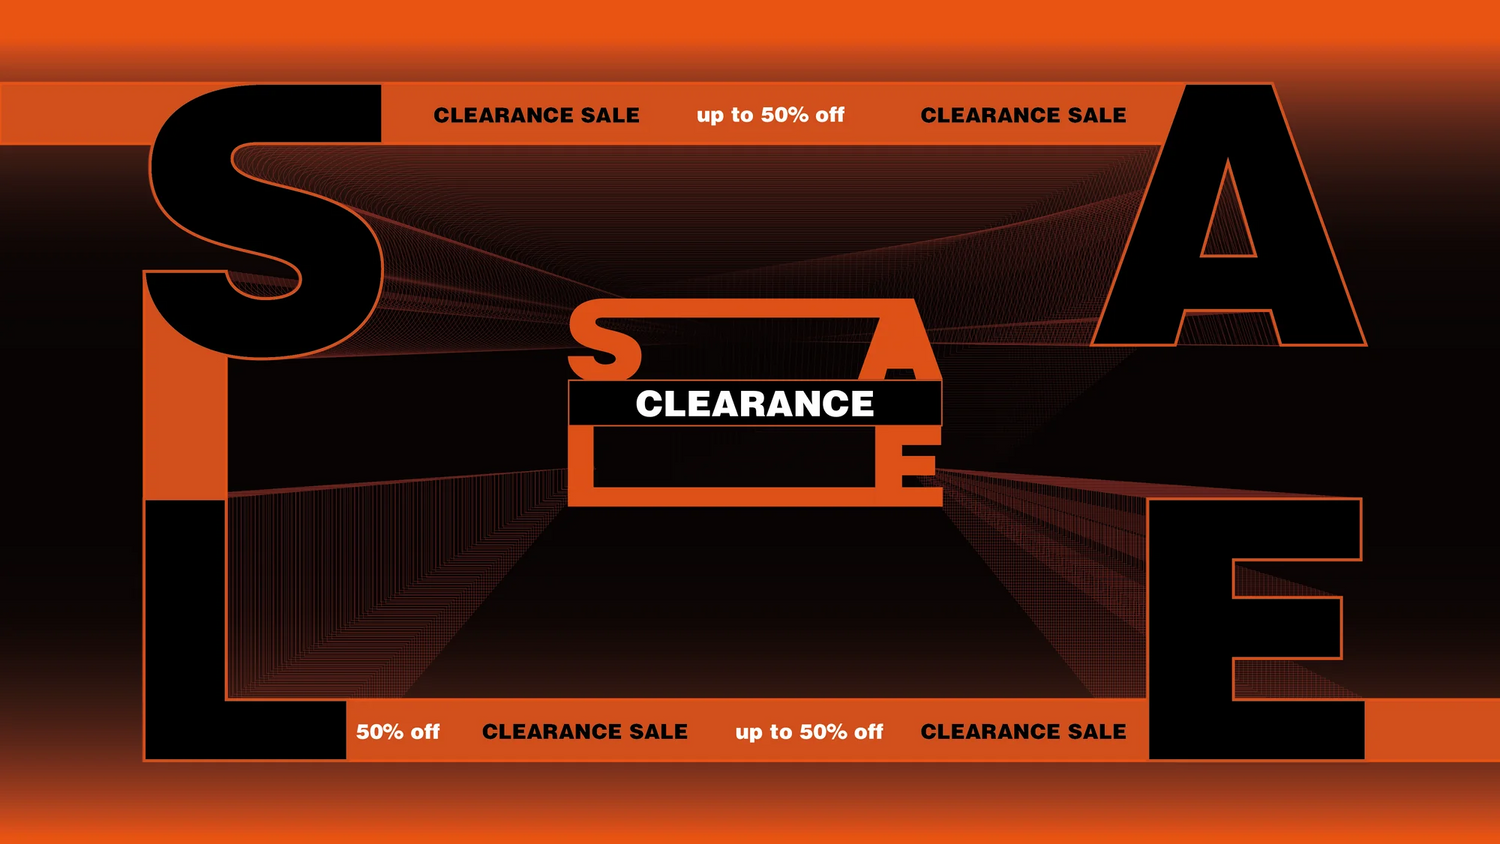 Grab the great deal with Clearance Sale right now!